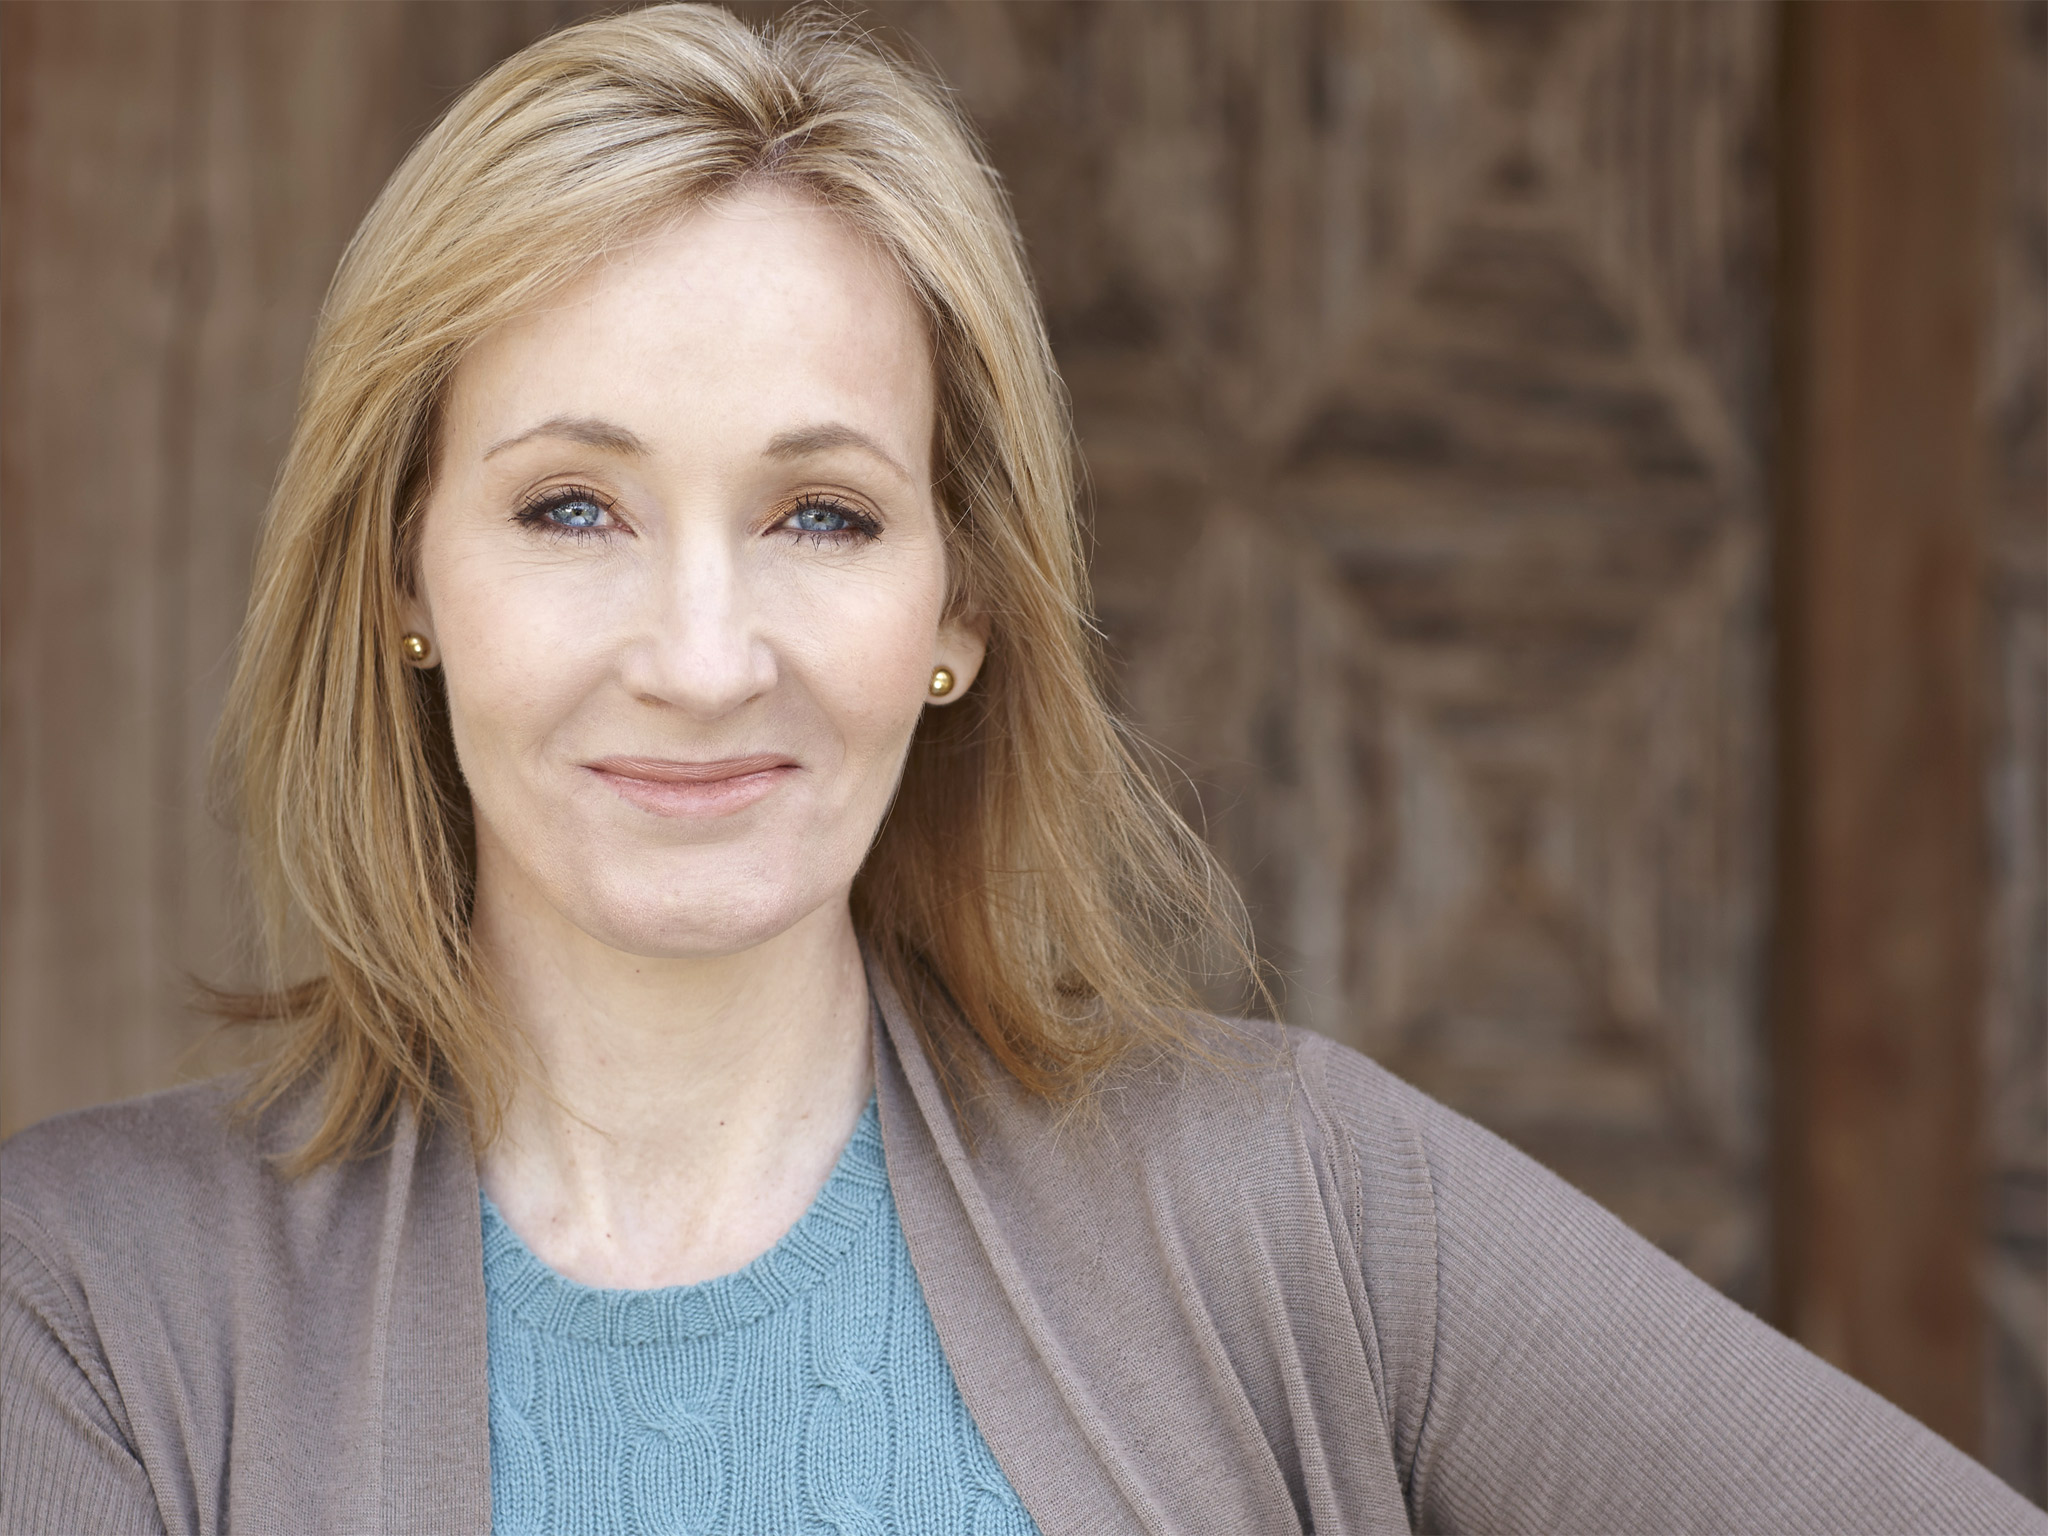 JK Rowling hits back at Twitter user who attacked her for revealing Dumbledore was gay - People - News - The Independent